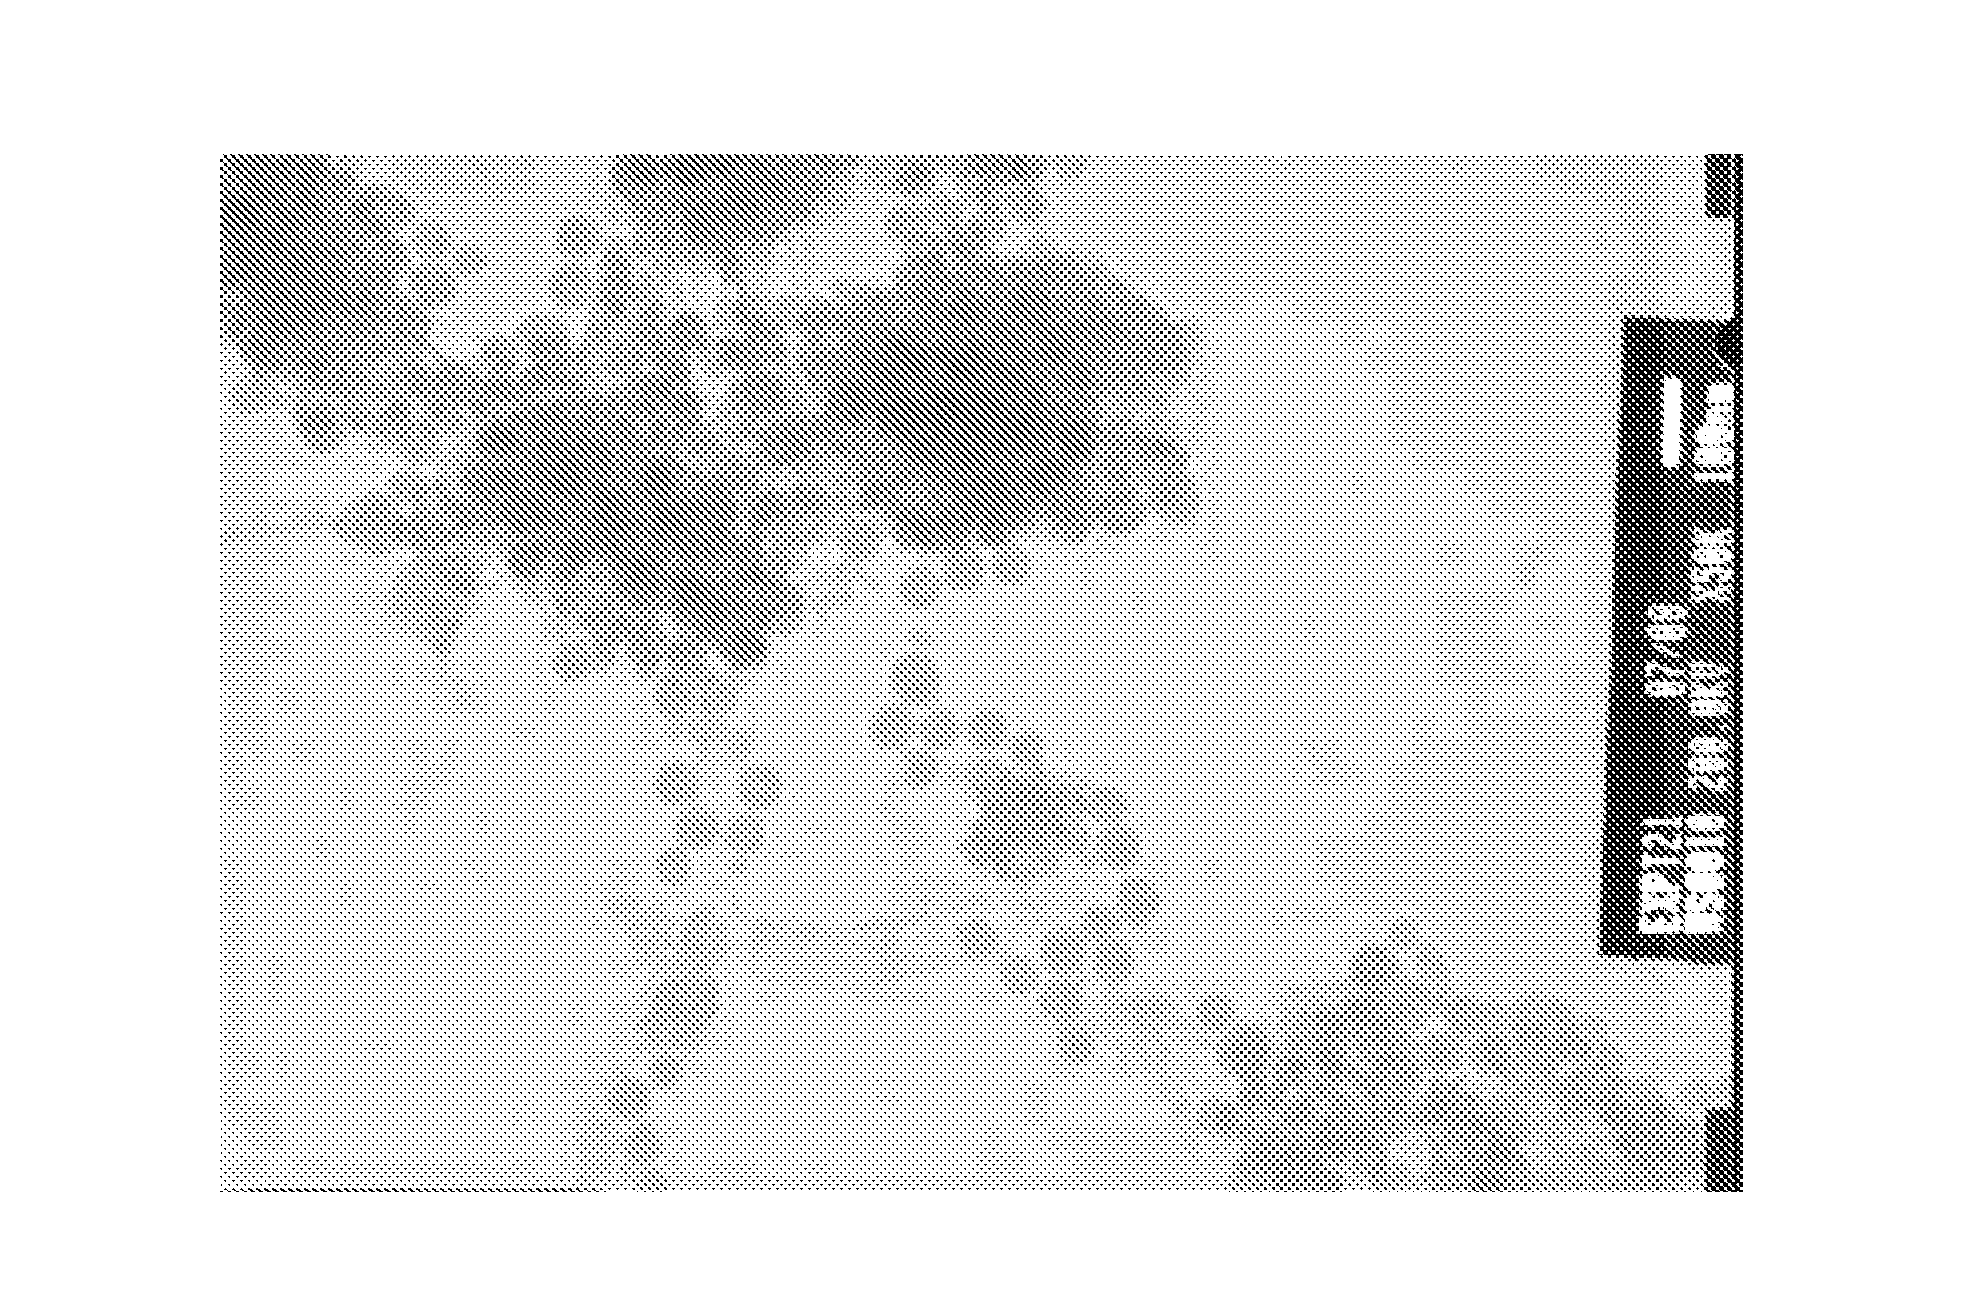 Method for preparing silica particles containing a phthalocyanine derivative, said particles and uses thereof